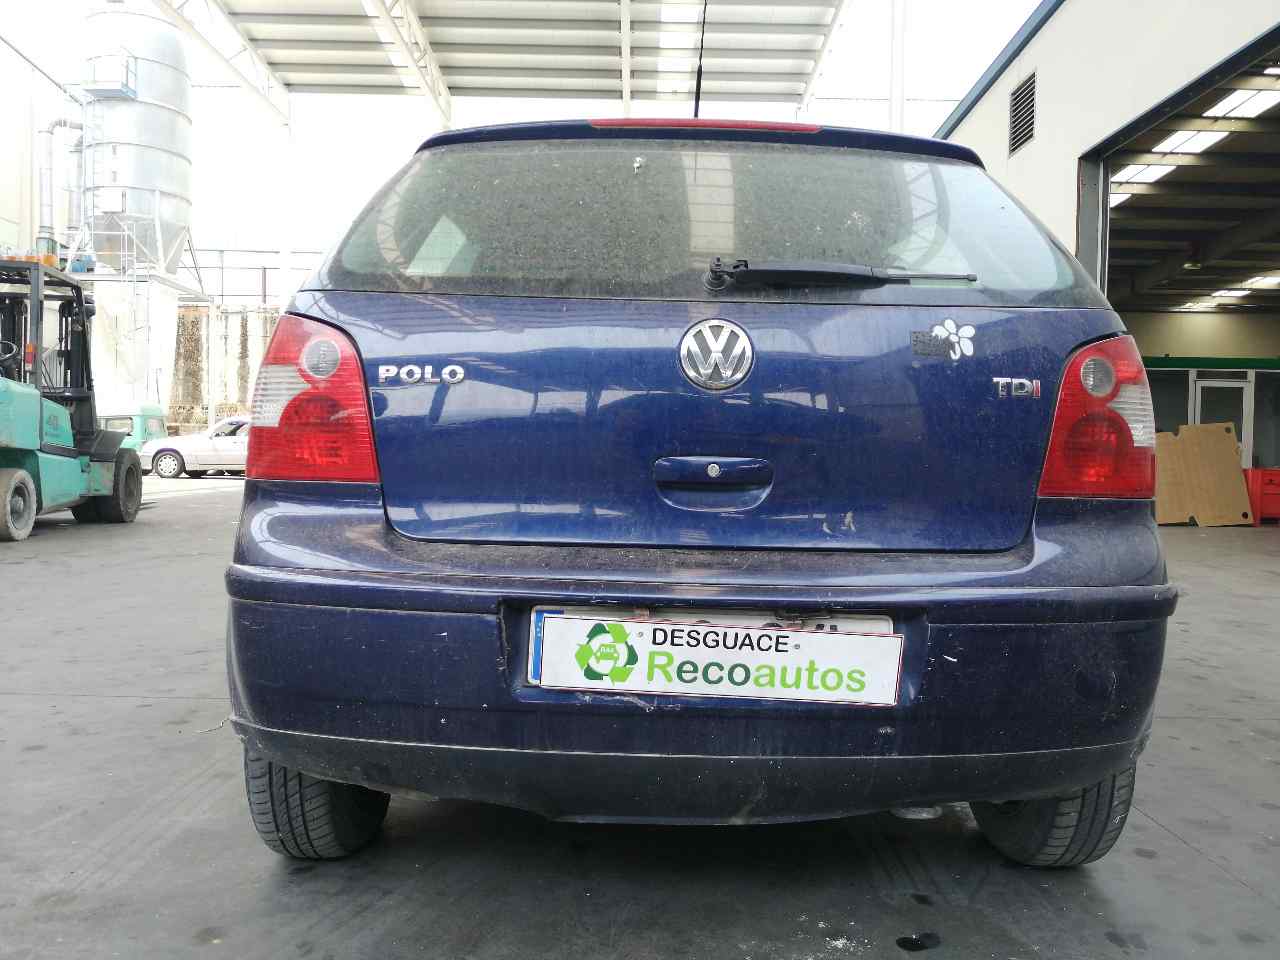 VOLKSWAGEN Polo 4 generation (2001-2009) Other Body Parts 6Q1721503B, 6PV00849501, HELLA 19816040